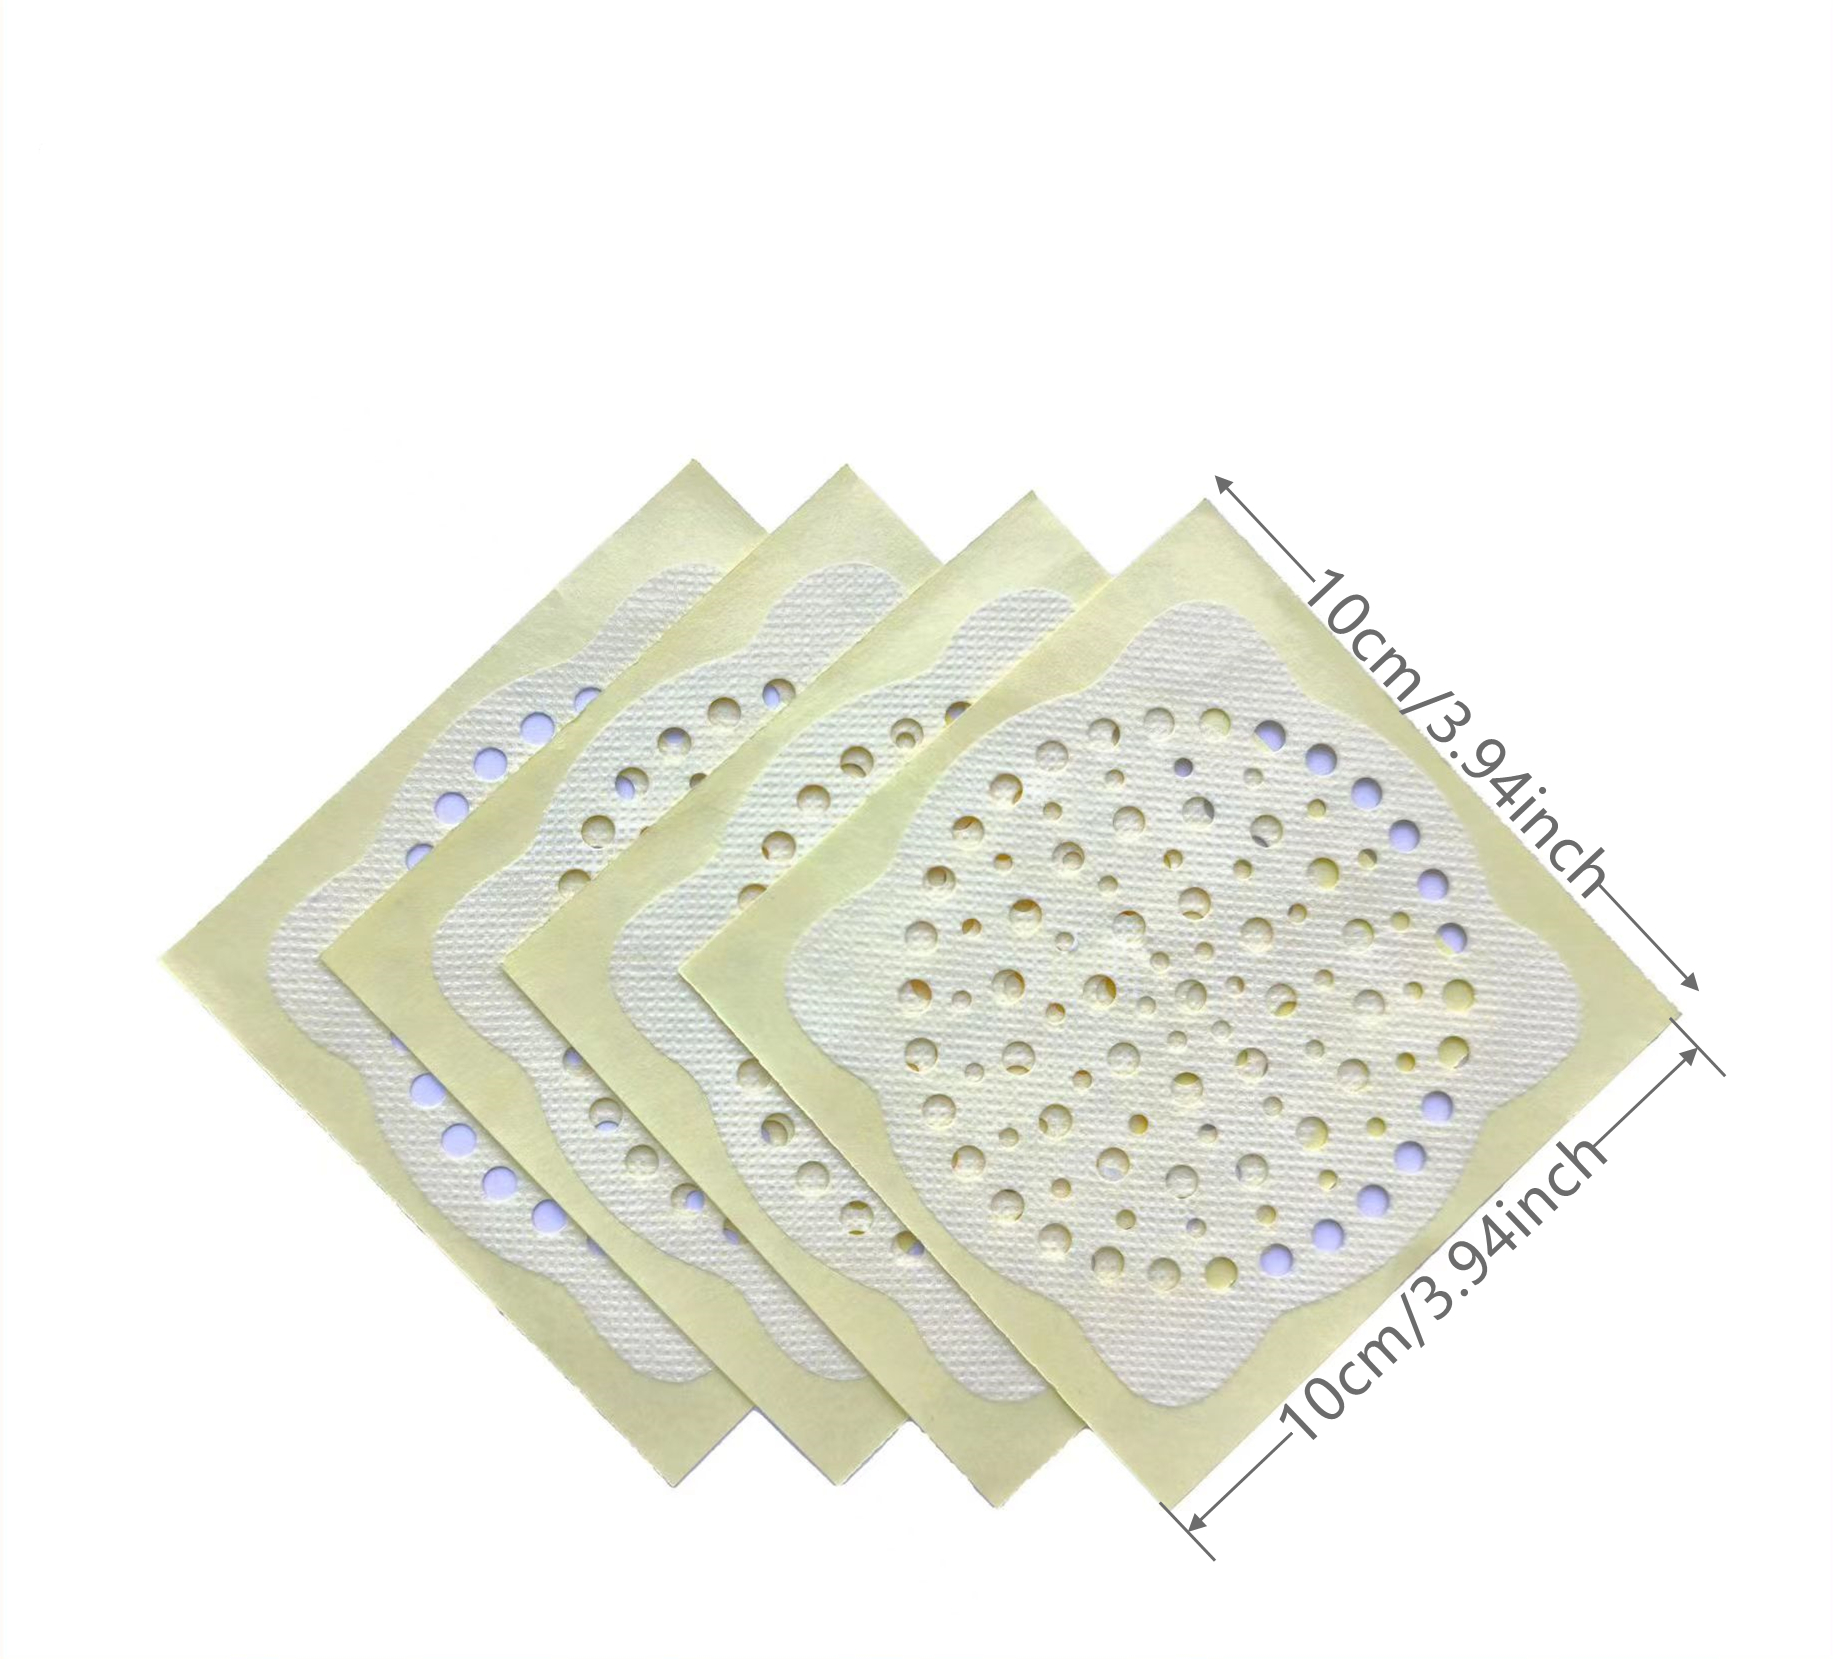 Disposable Drain Hair Catcher Stickers for Shower, White Mesh Stickers  4.3'', 25 PCS, Sticky Covers, Shower Drain Protector, Anti-Blockage